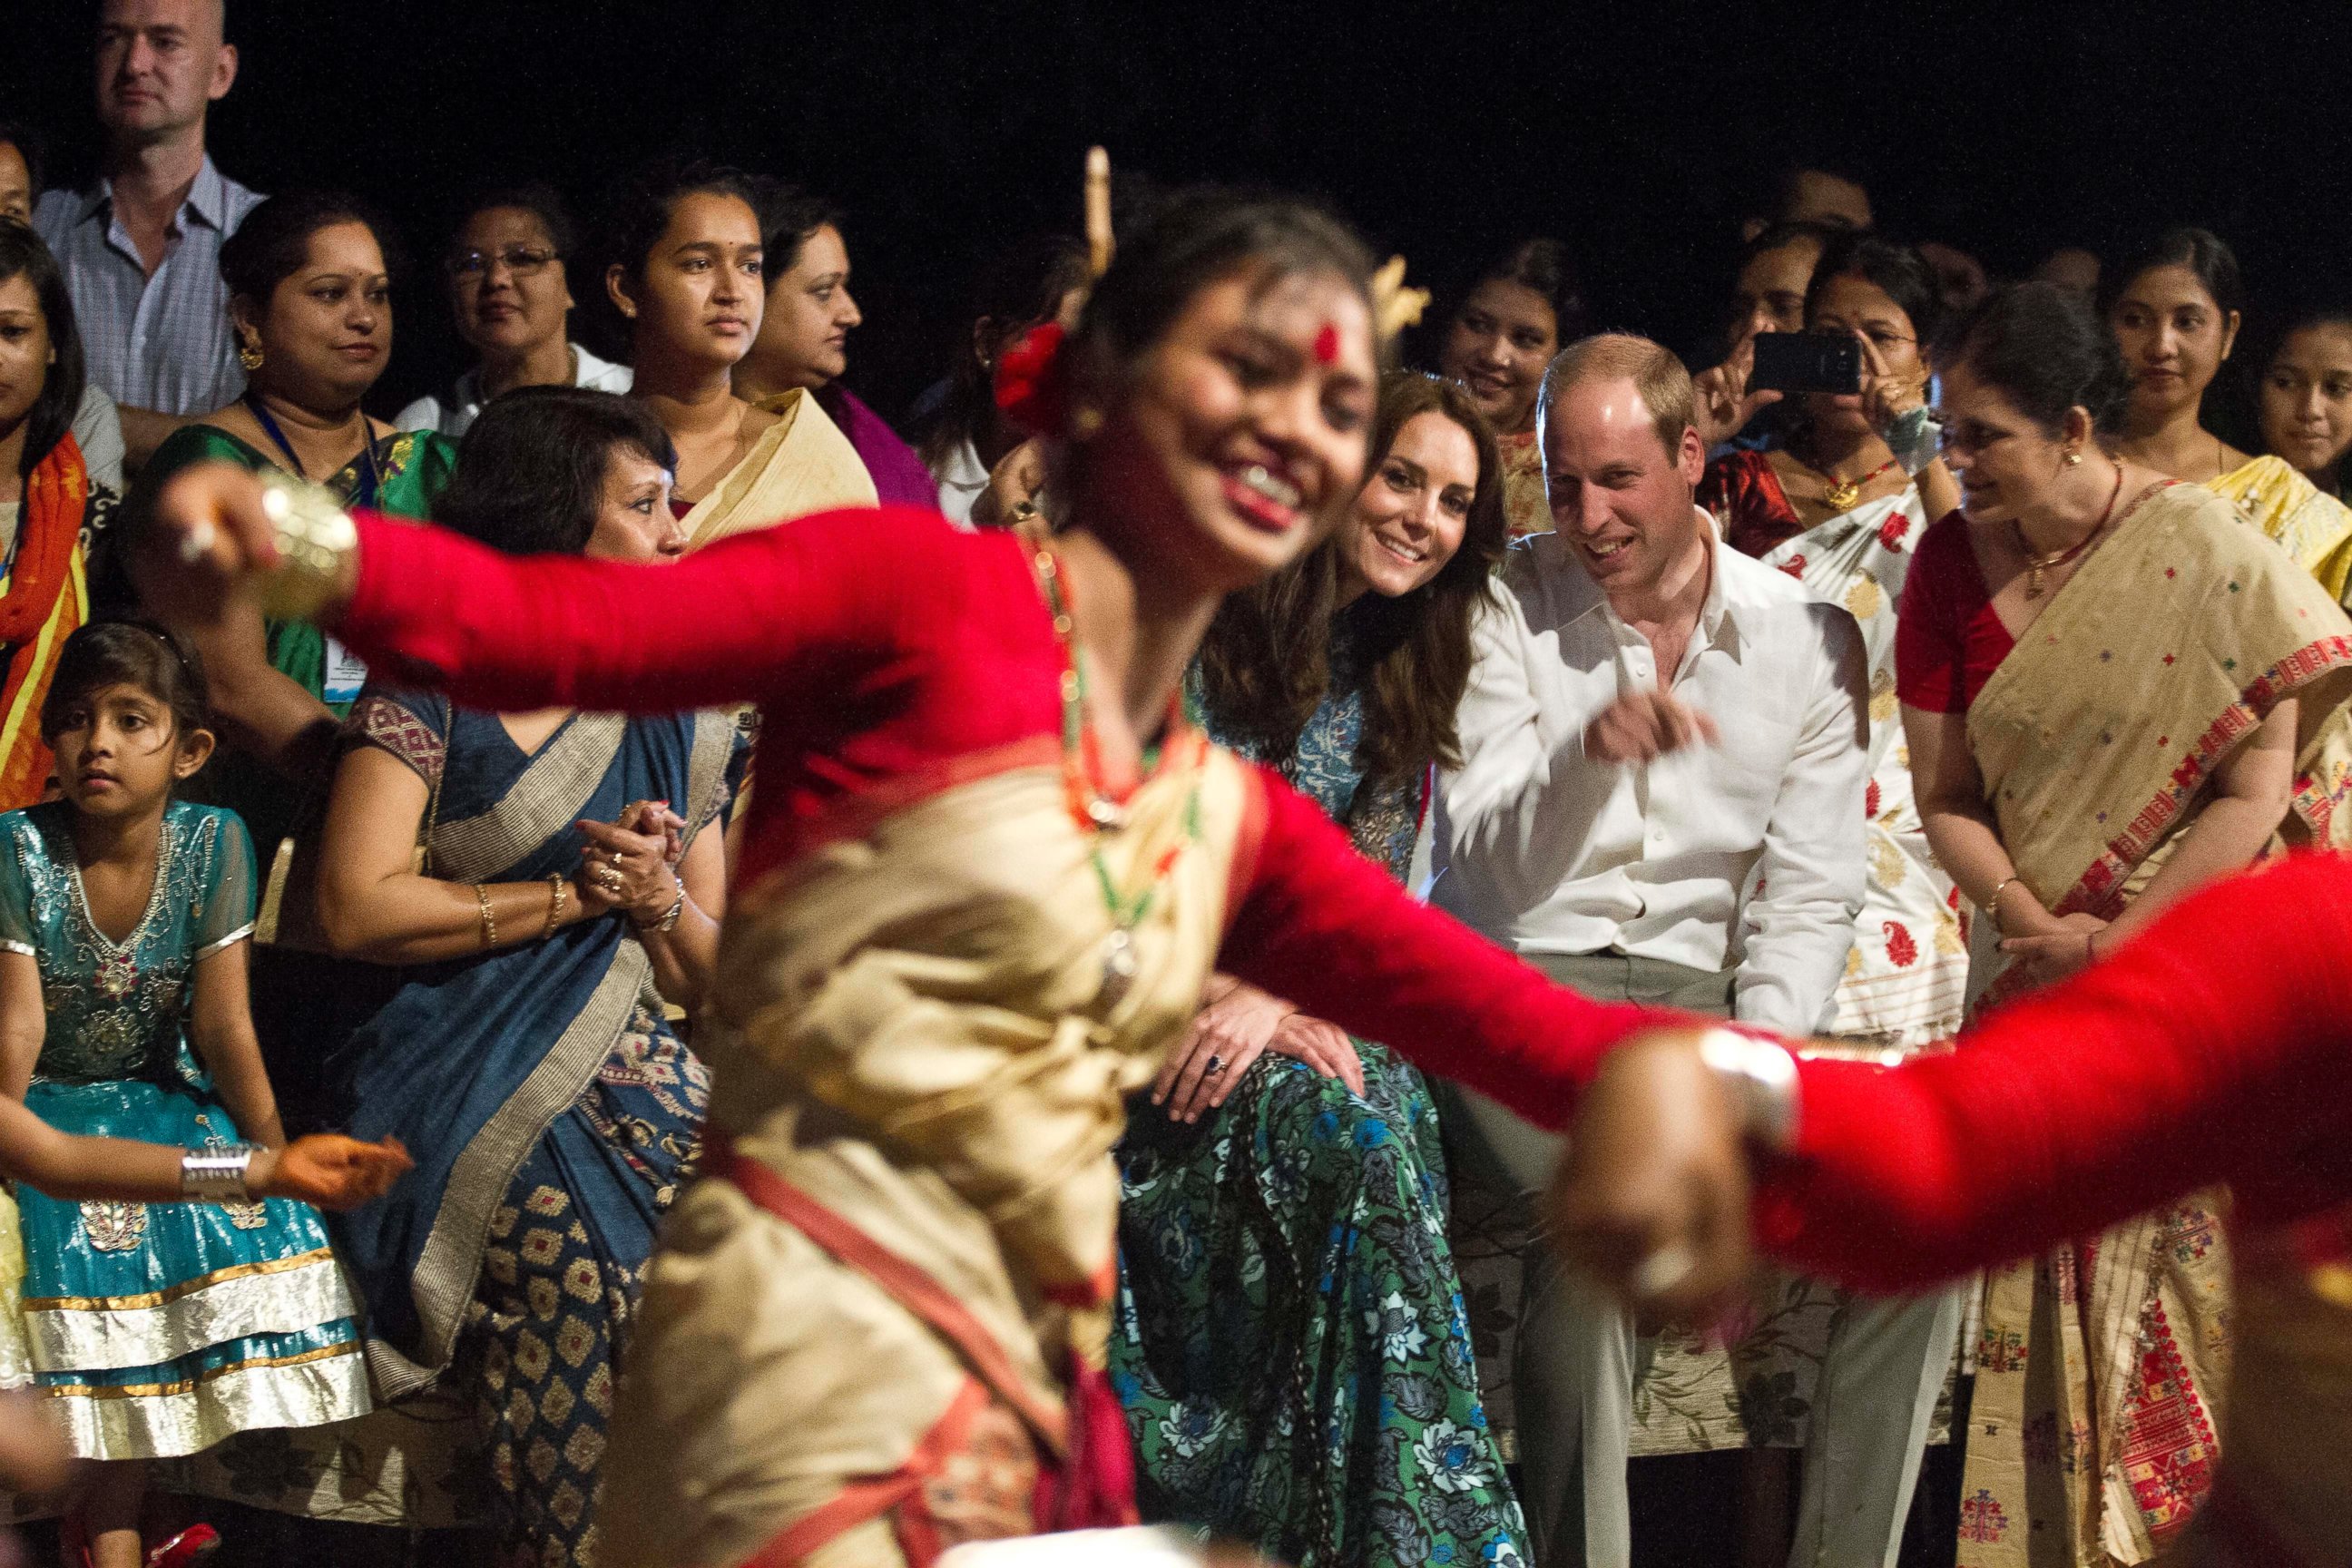 PHOTO: Britain's Prince William and Kate, the Duchess of Cambridge watch Assamese traditional dancers perform in Diphlu River Lodge in the Kaziranga National Park, northeastern Assam state, India, April 12, 2016.